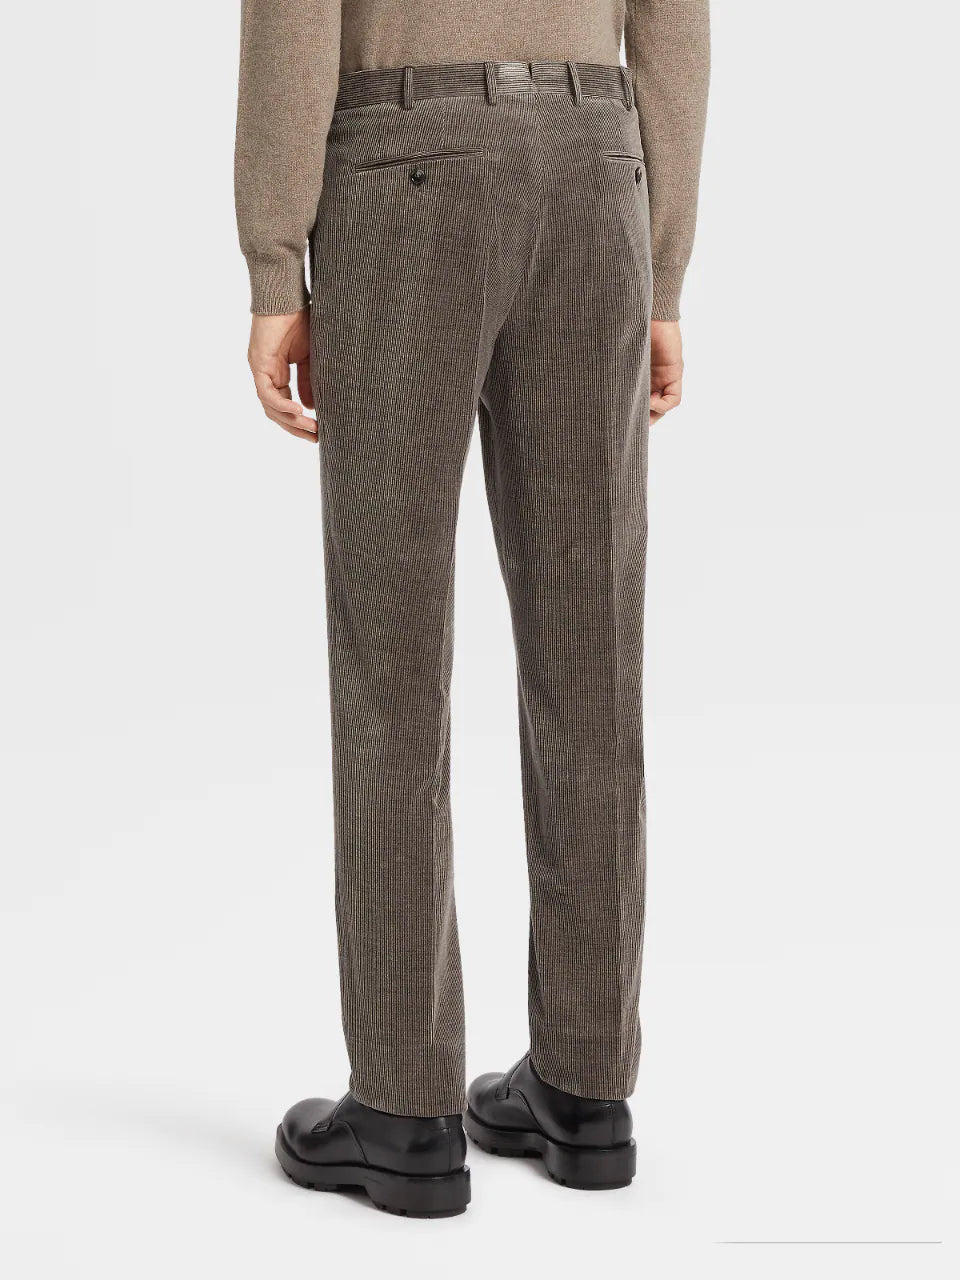 Zegna Corduroy Sport Trousers in Grey Brown